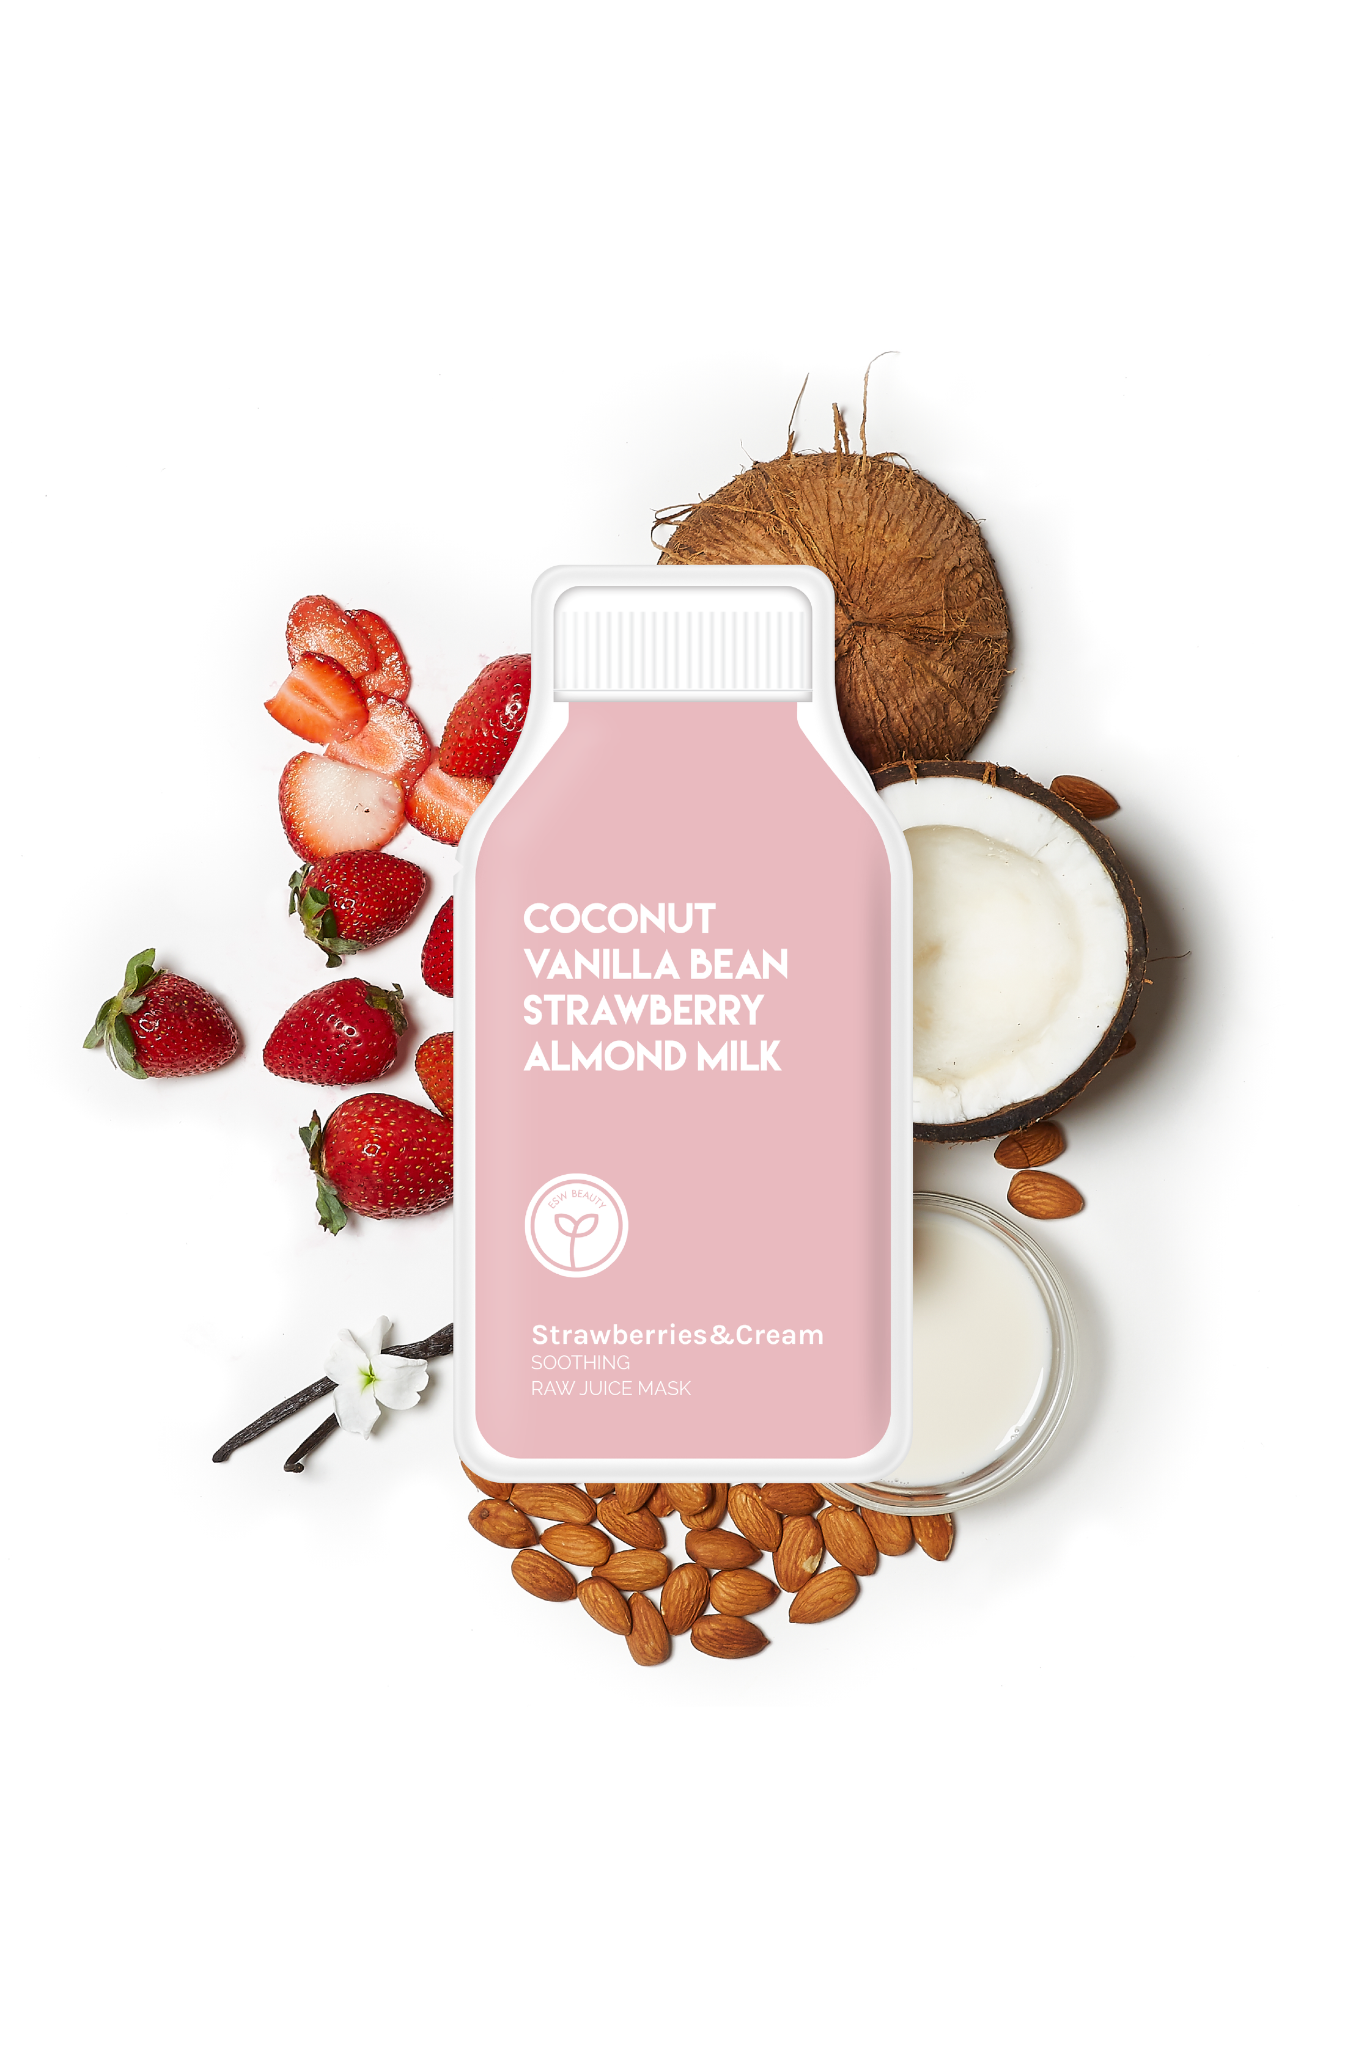 ESW Beauty - Strawberries and Cream Soothing Raw Juice Sheet Mask